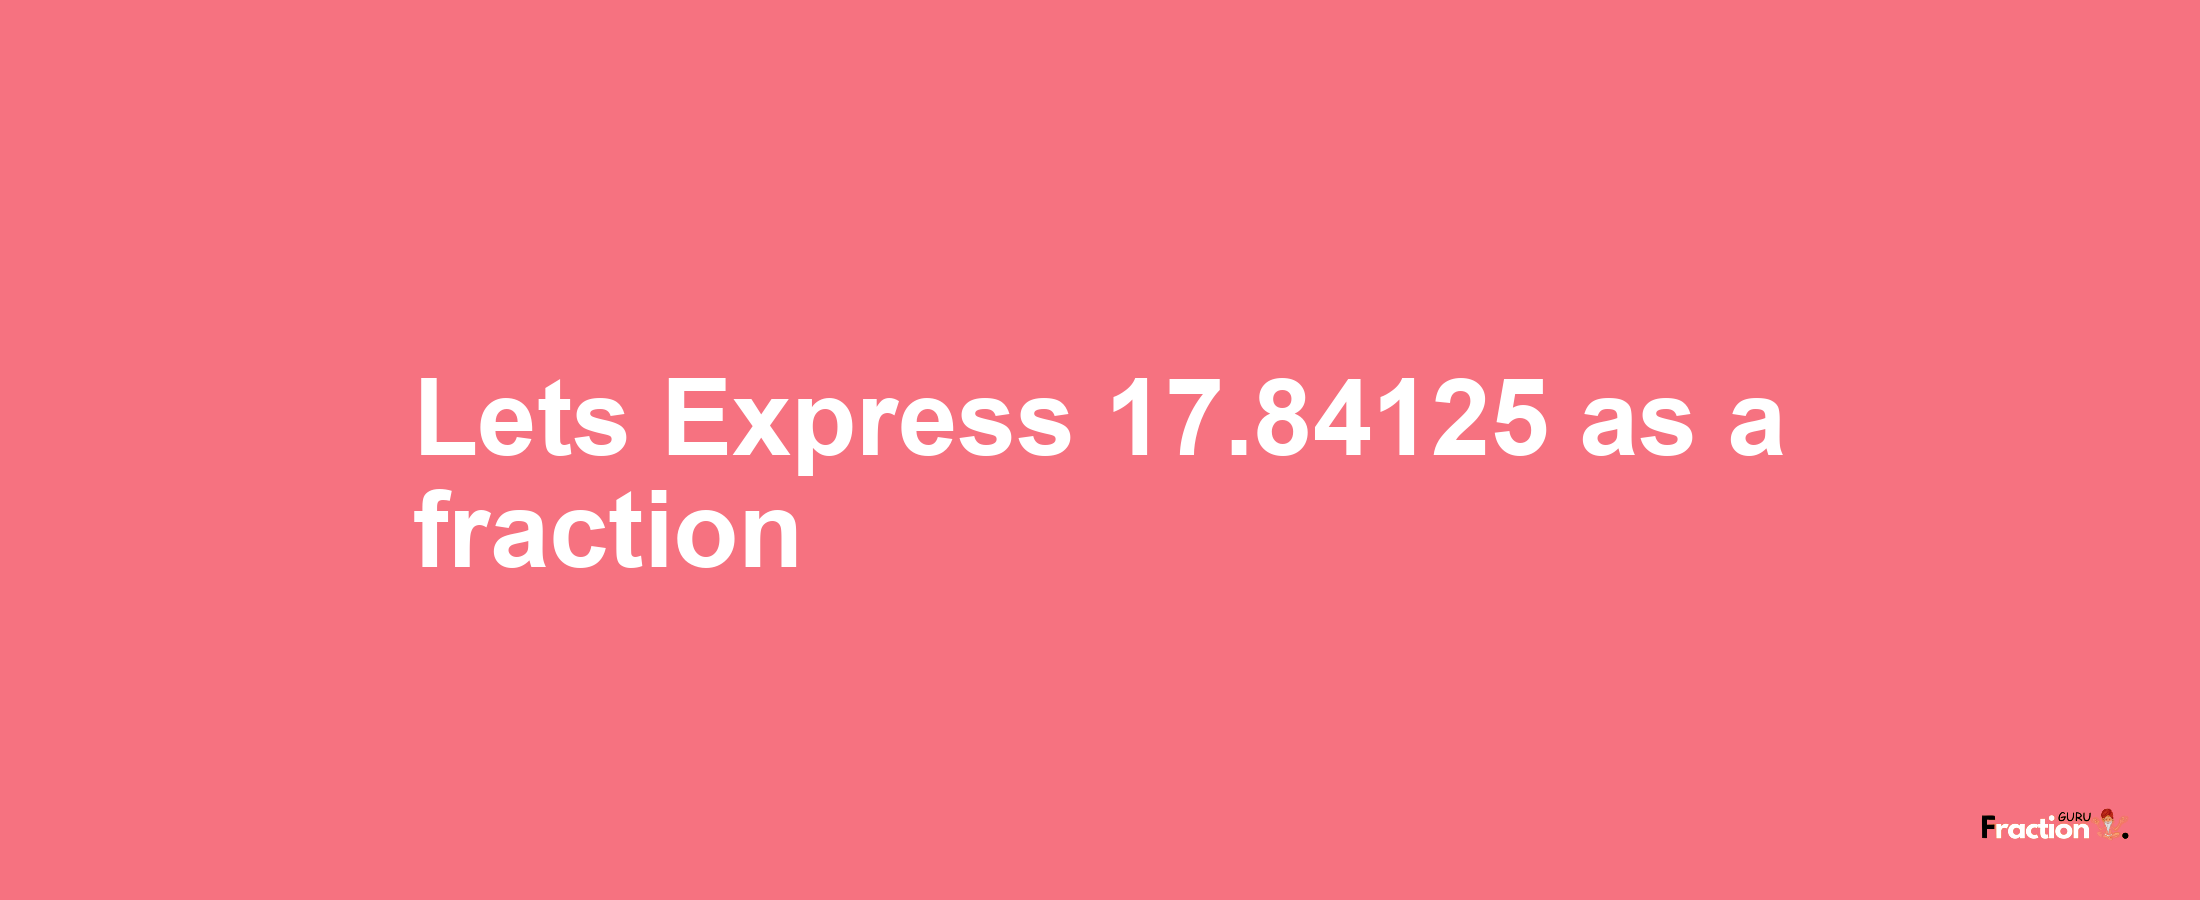 Lets Express 17.84125 as afraction